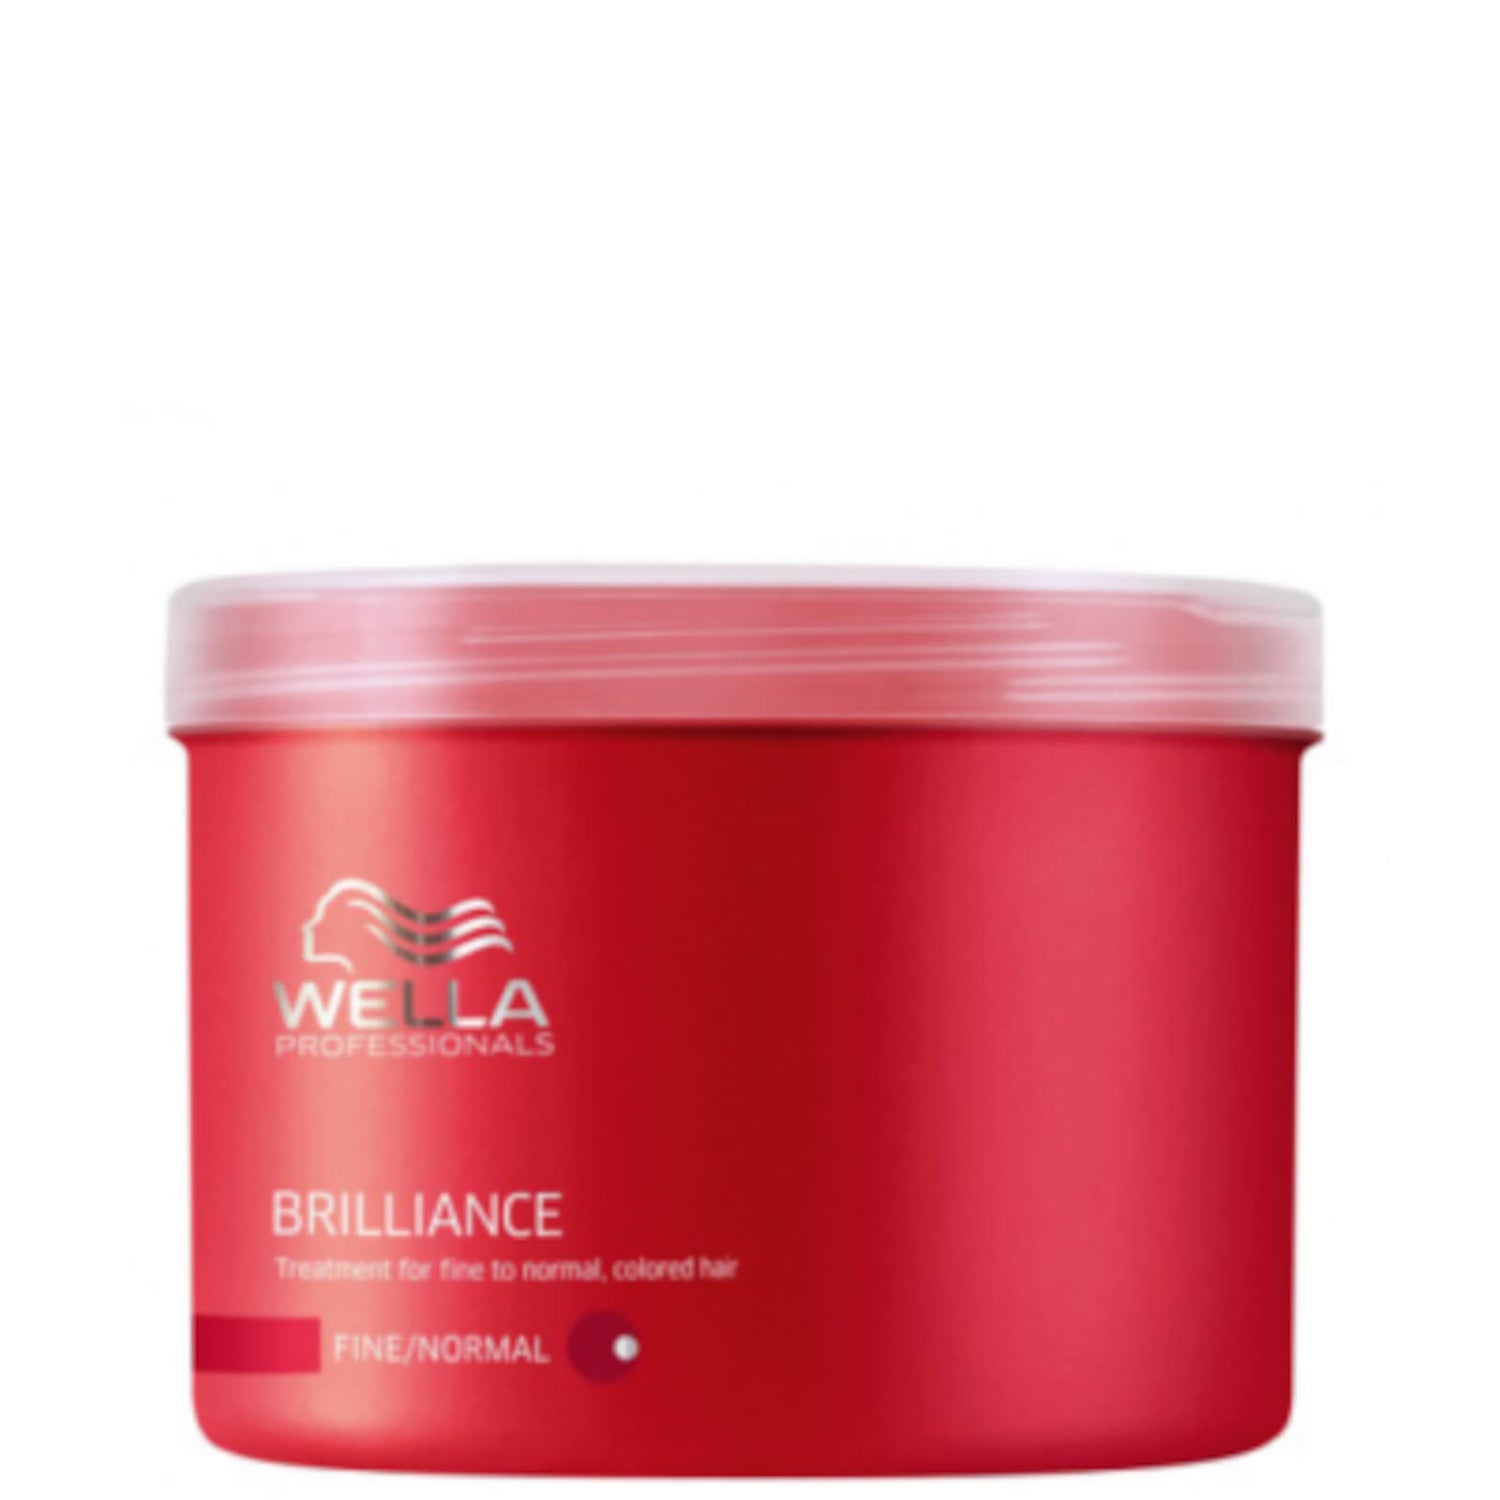 Wella Professionals Brilliance Treatment For Fine To Normal, Coloured Hair (500 ml)